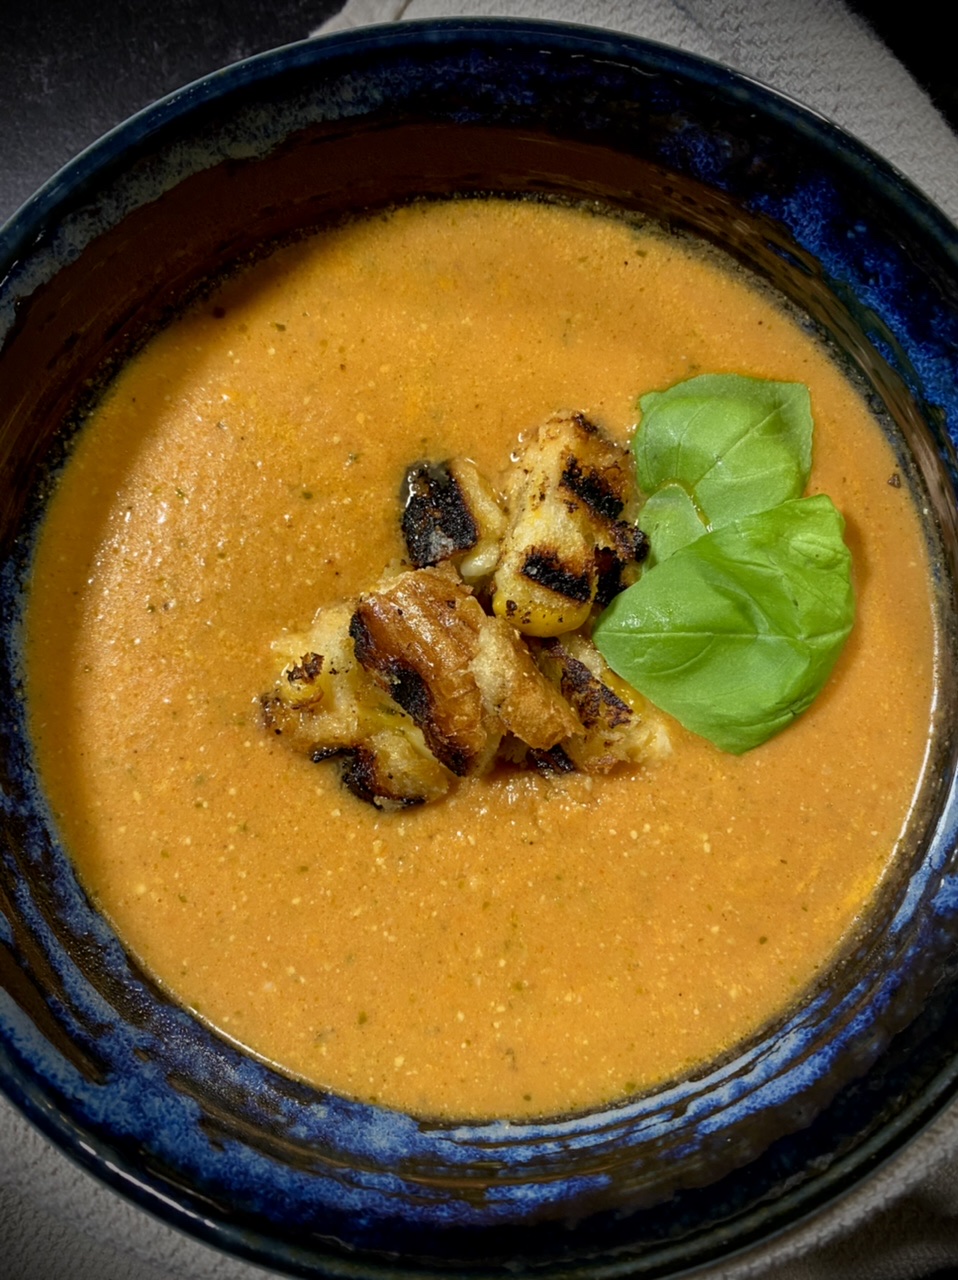 96EC1031 E6E3 464B 827F 150CDD17FE8F - One Pot Tomato Soup with Grilled Cheese Croutons